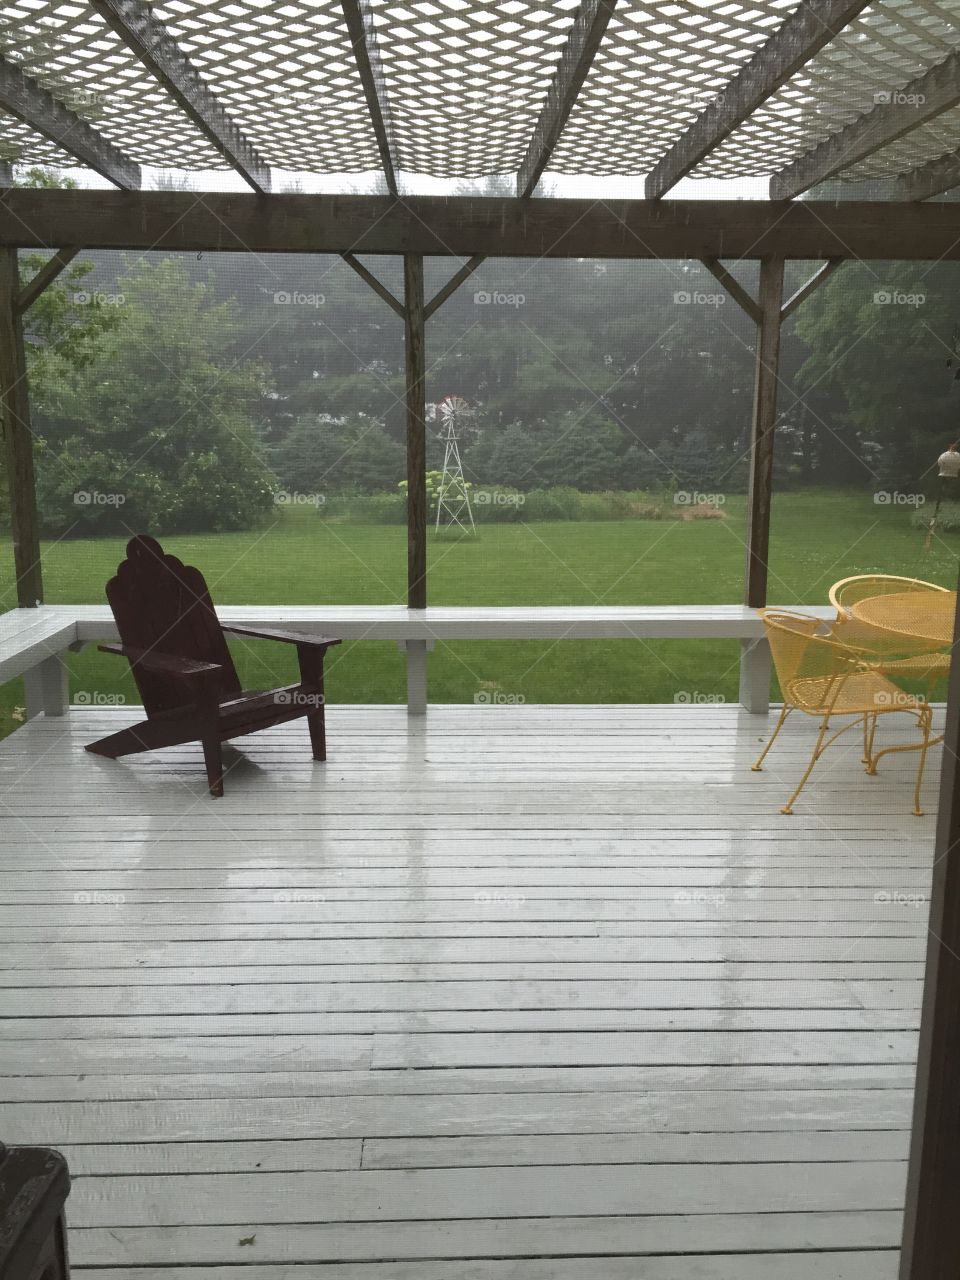 Raining . Wishing the rain would stop so we could enjoy the deck 